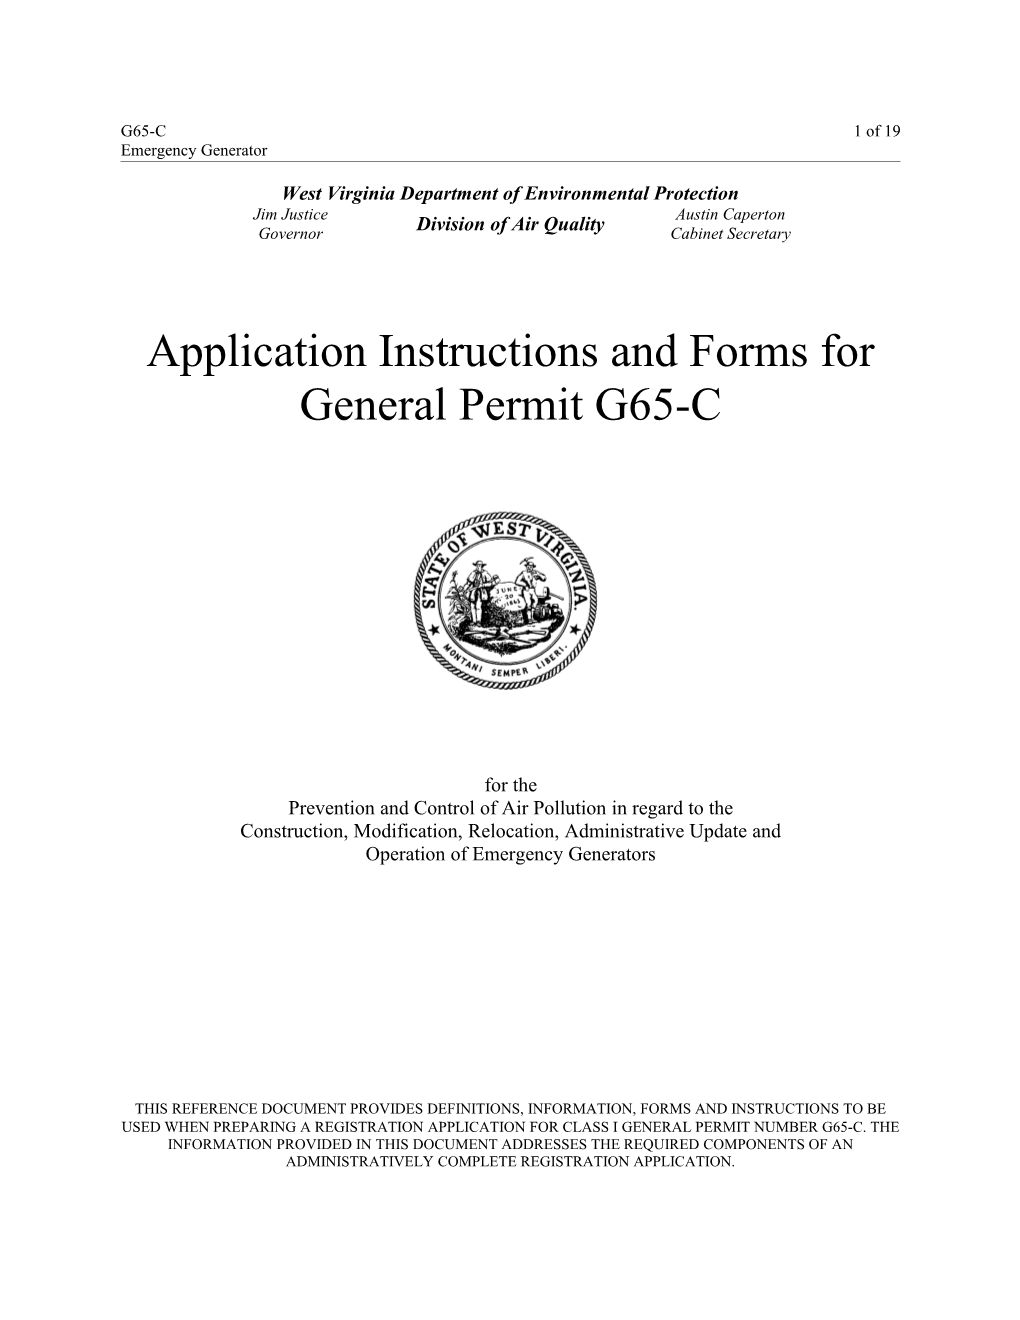 Application Instructions and Forms for General Permit G65-C